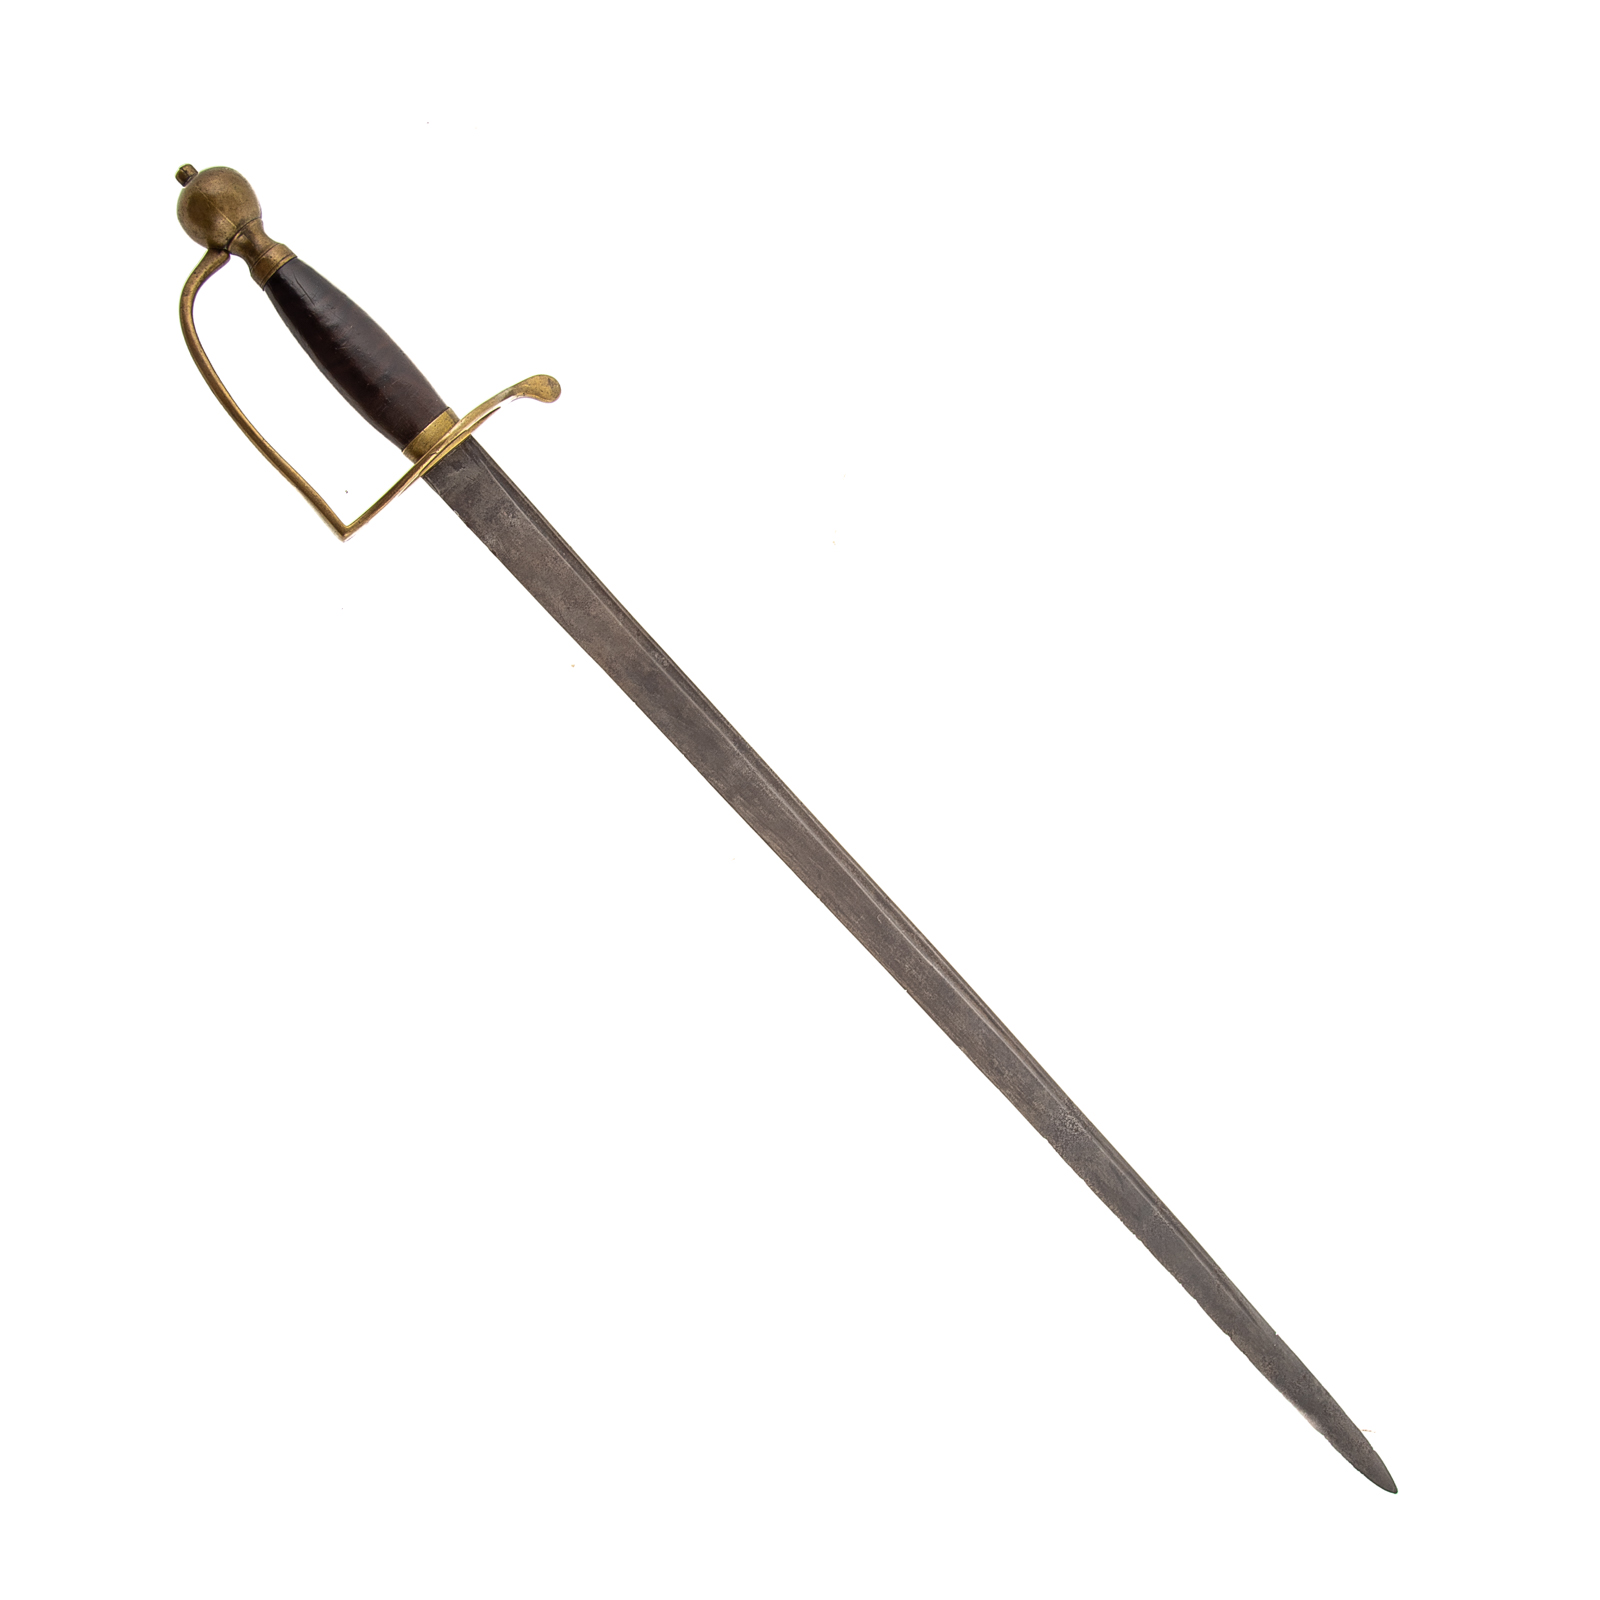 U S NON COMMISSIONED OFFICER SWORD 335423